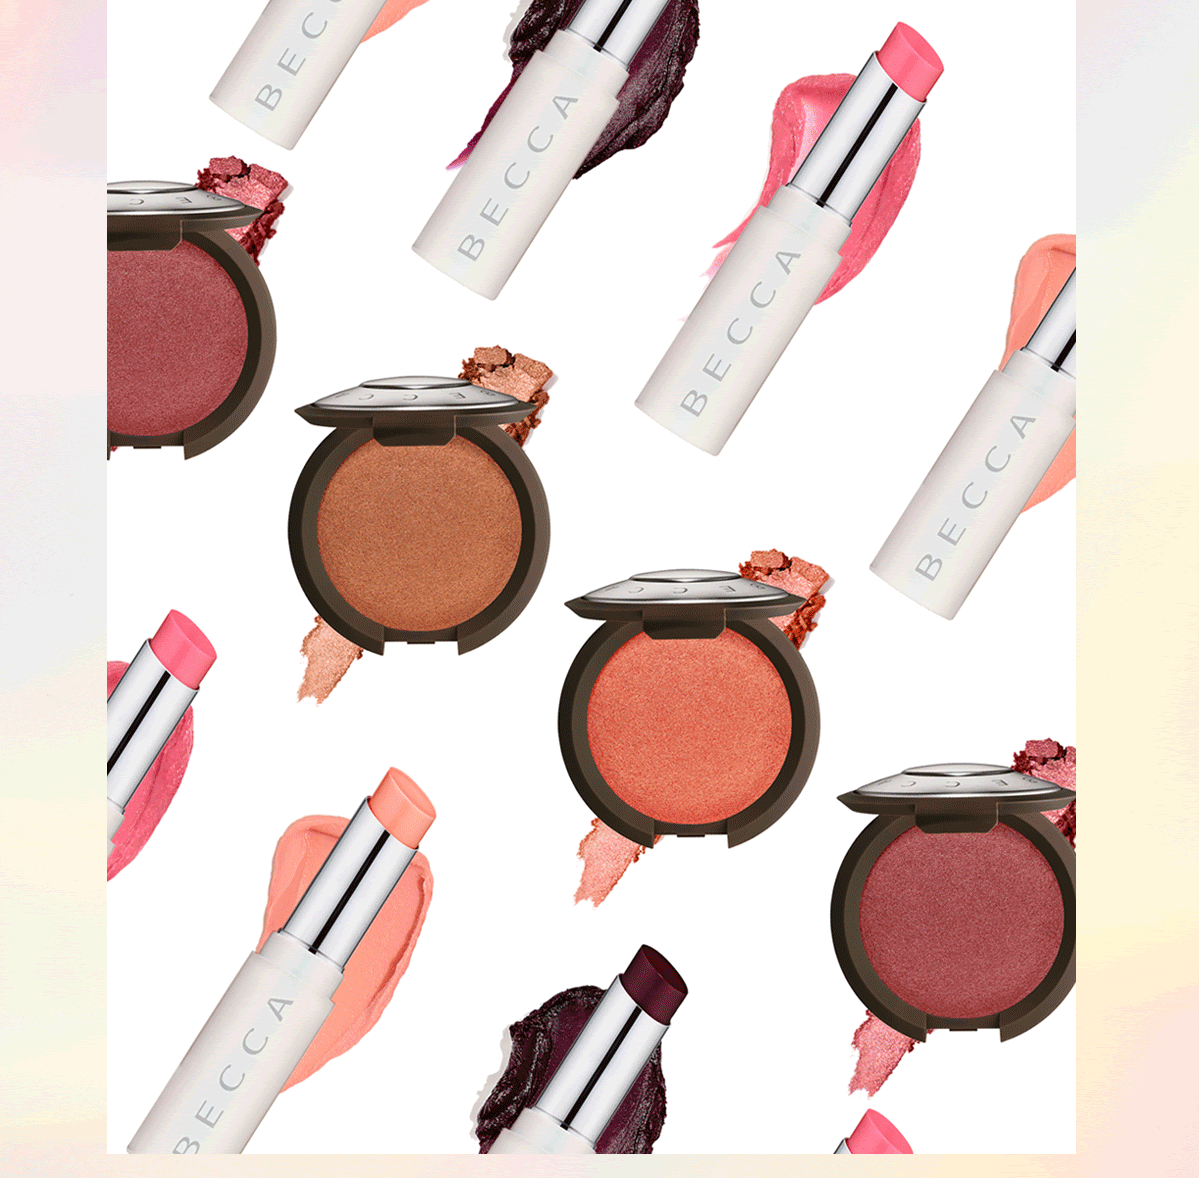 get your choice of luminous blush and pearl glow lip tint with every $65+ purchase. shop now